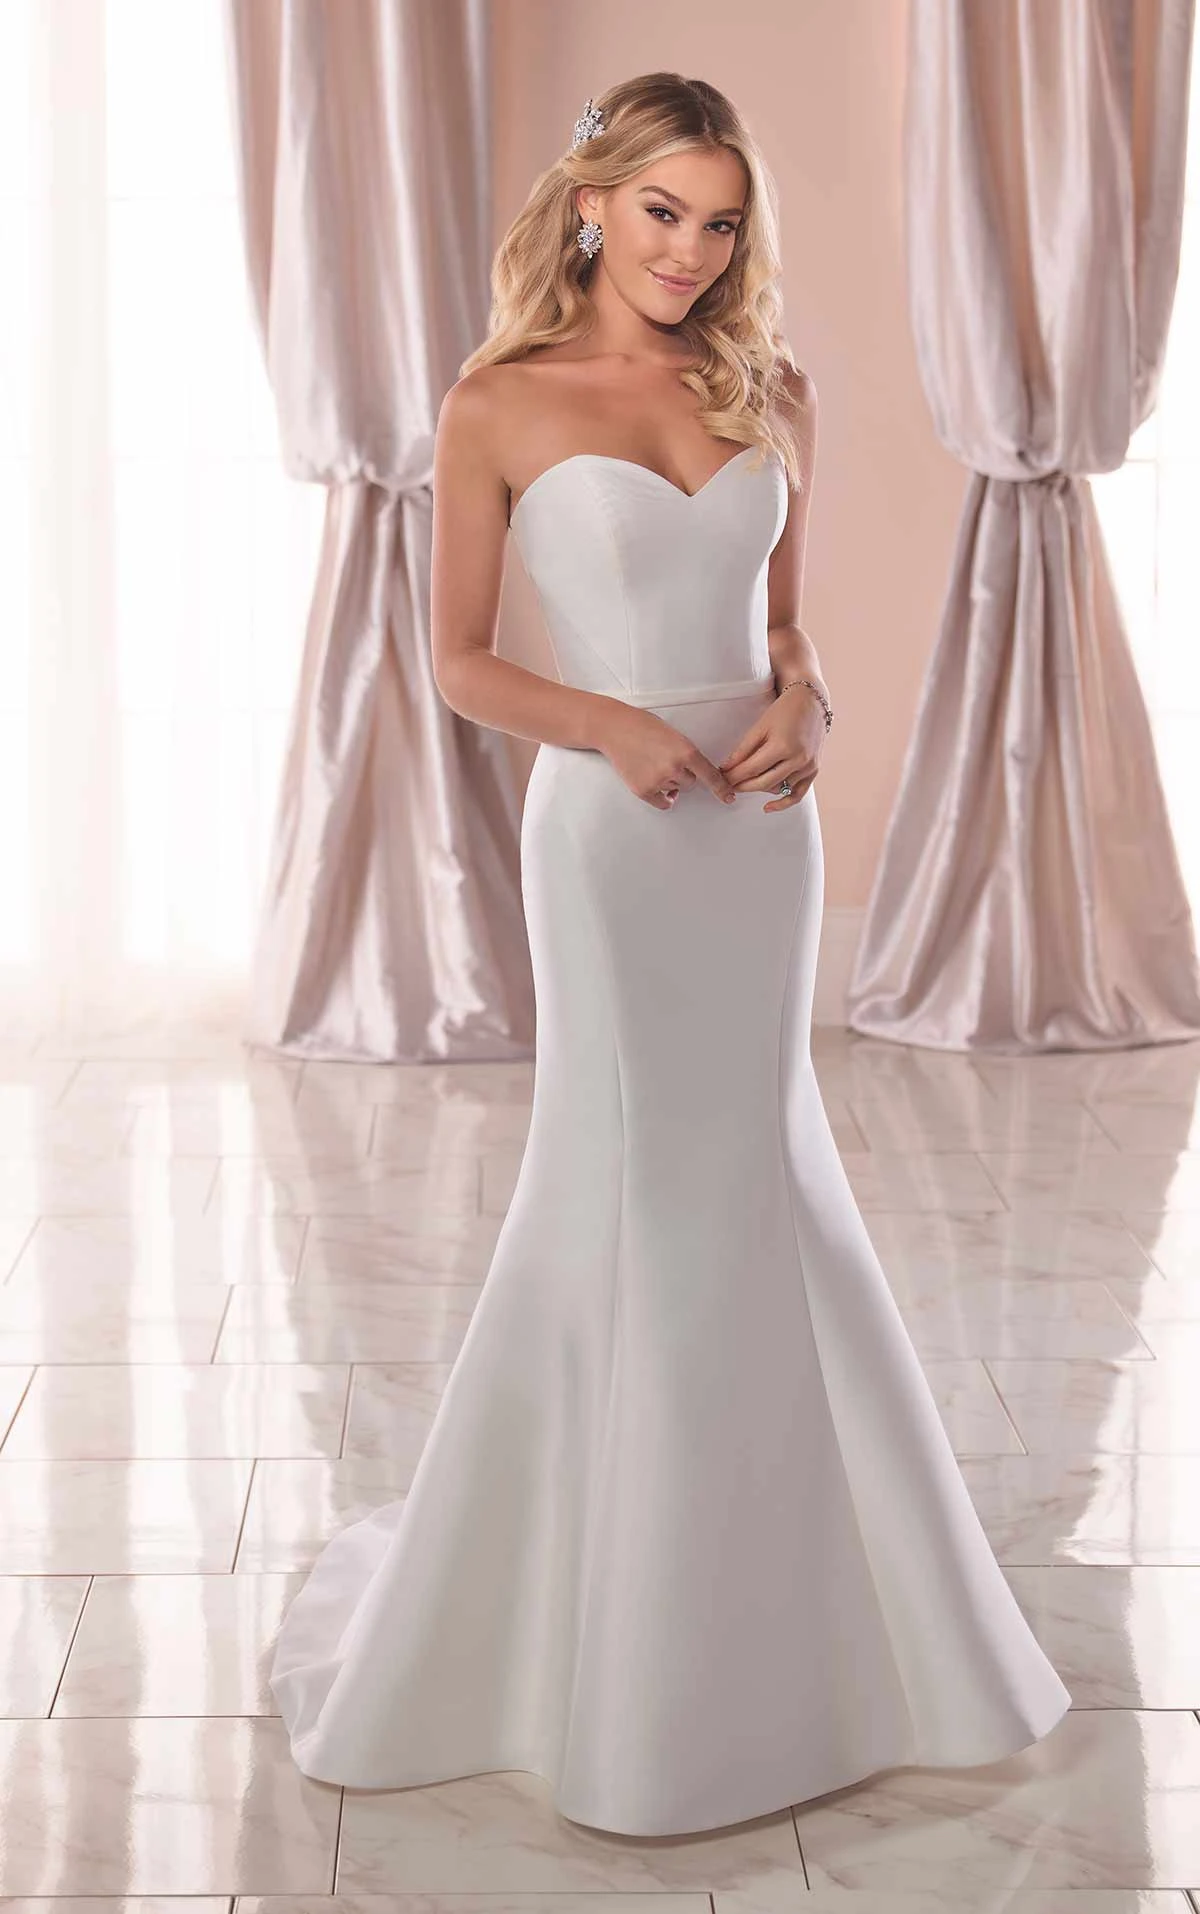 How To Spot Clean A Wedding Dress How To Clean A Wedding